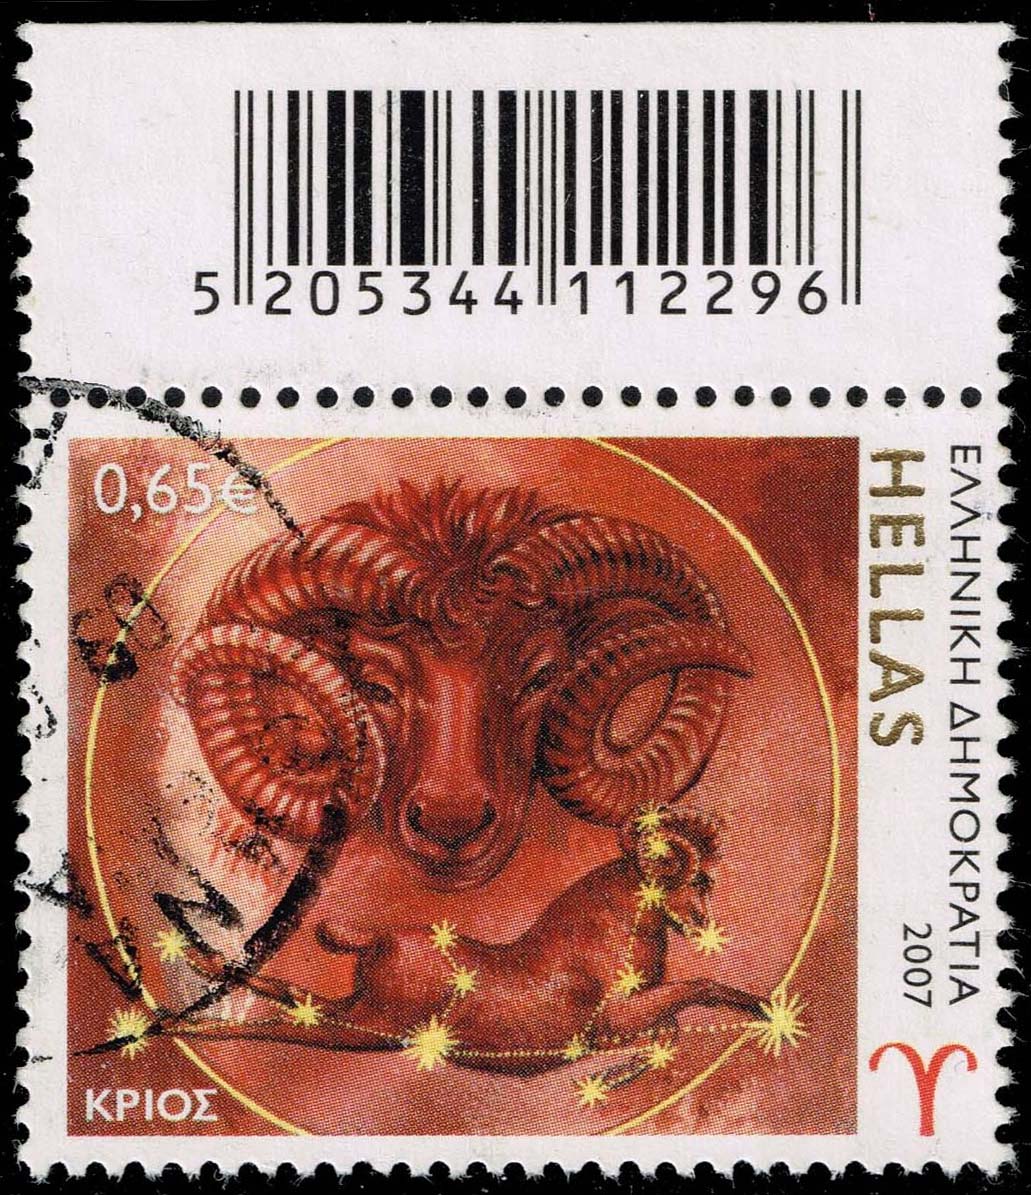 Greece #2314 Aries; Used - Click Image to Close